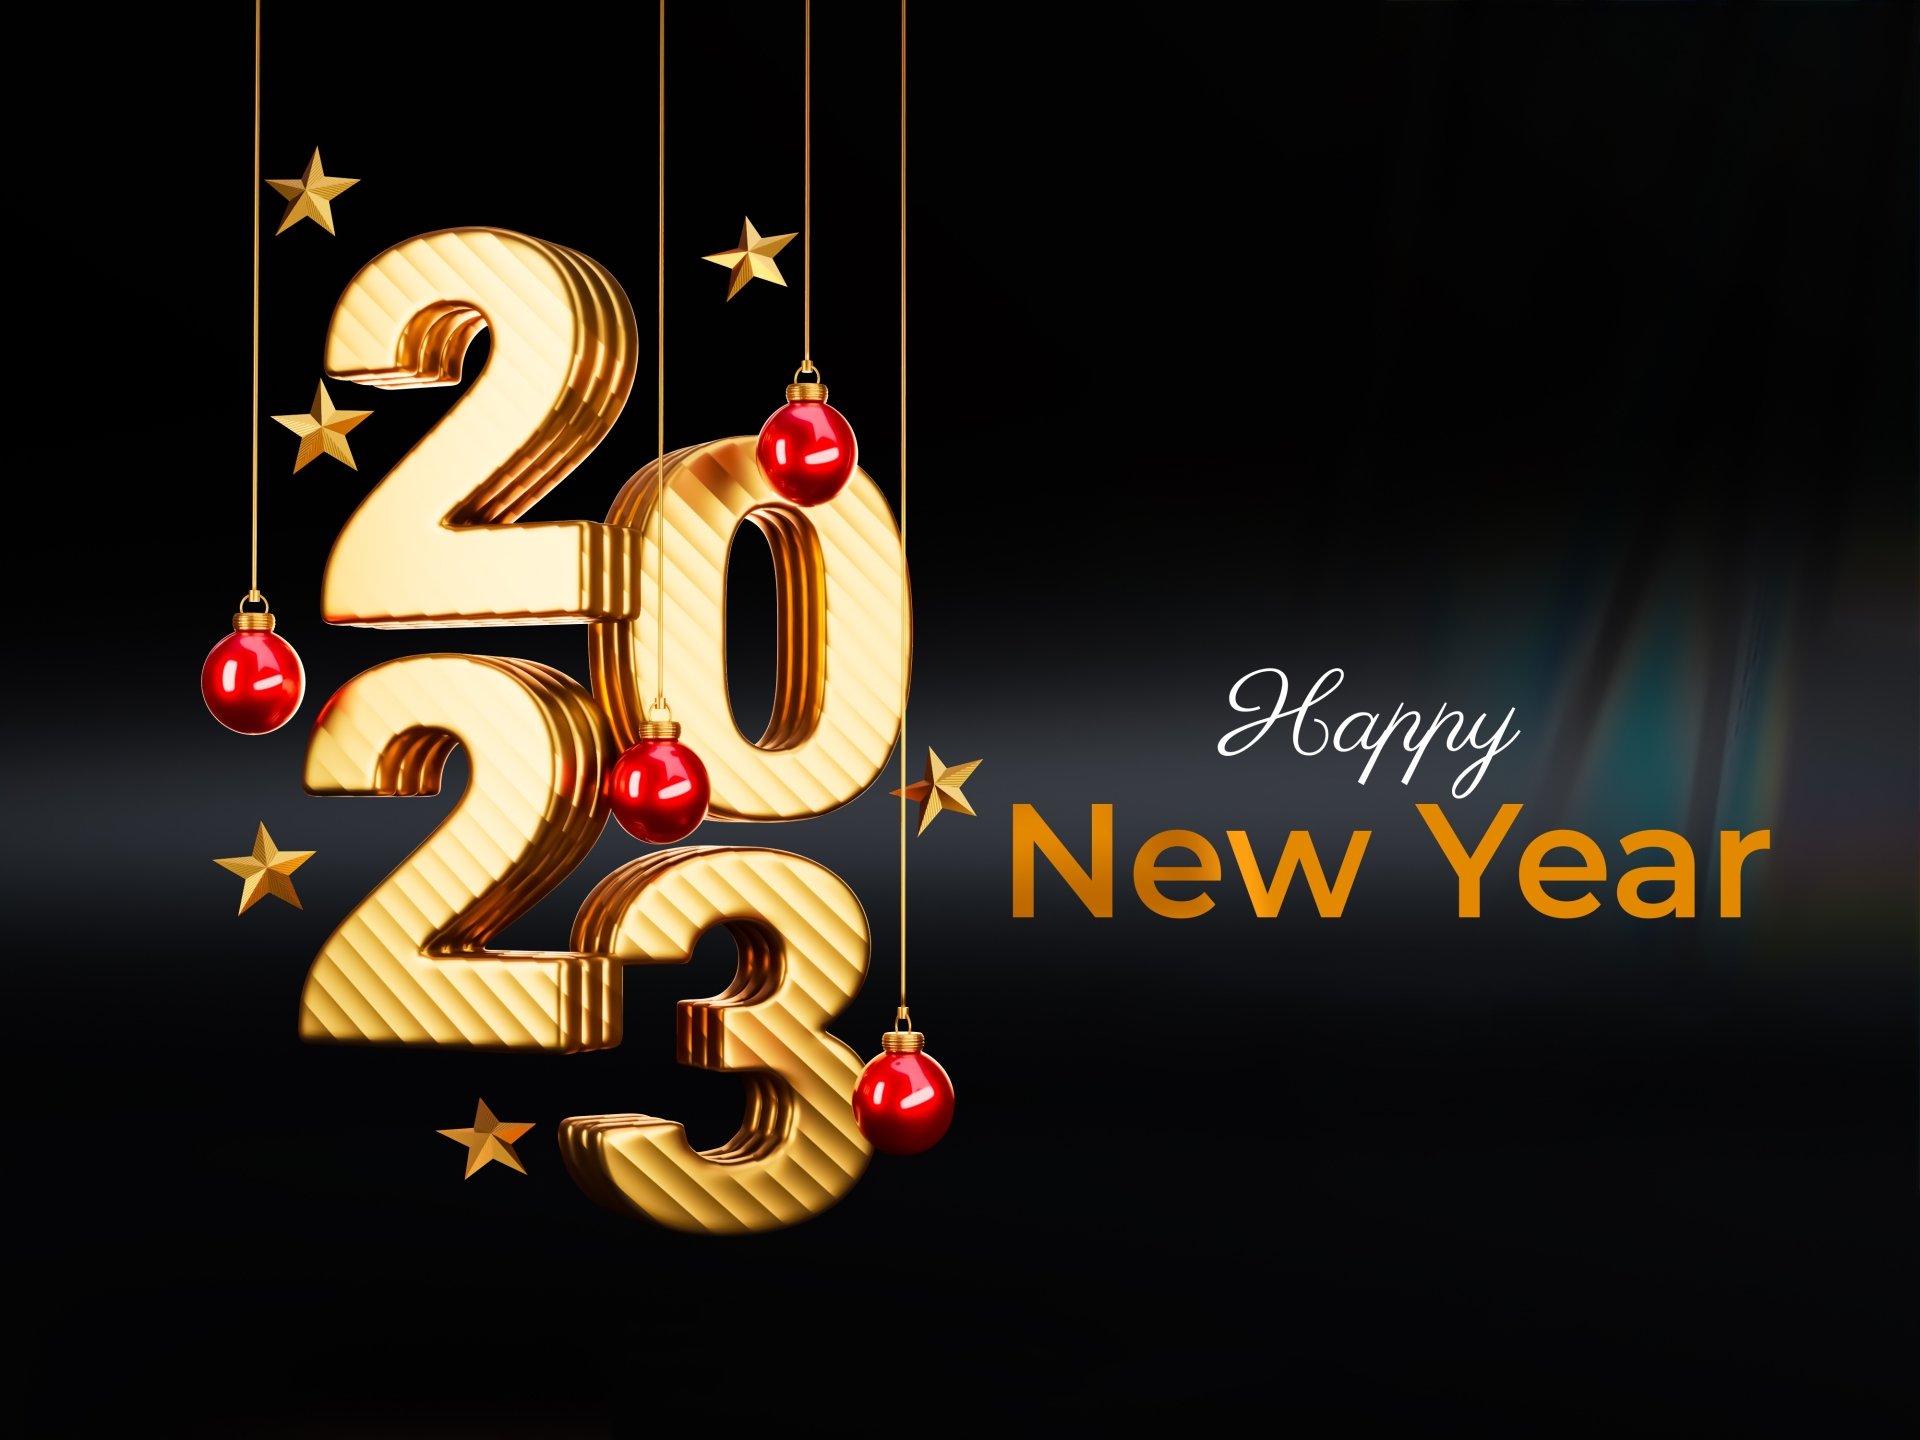 540+ Happy New Year HD Wallpapers and Backgrounds